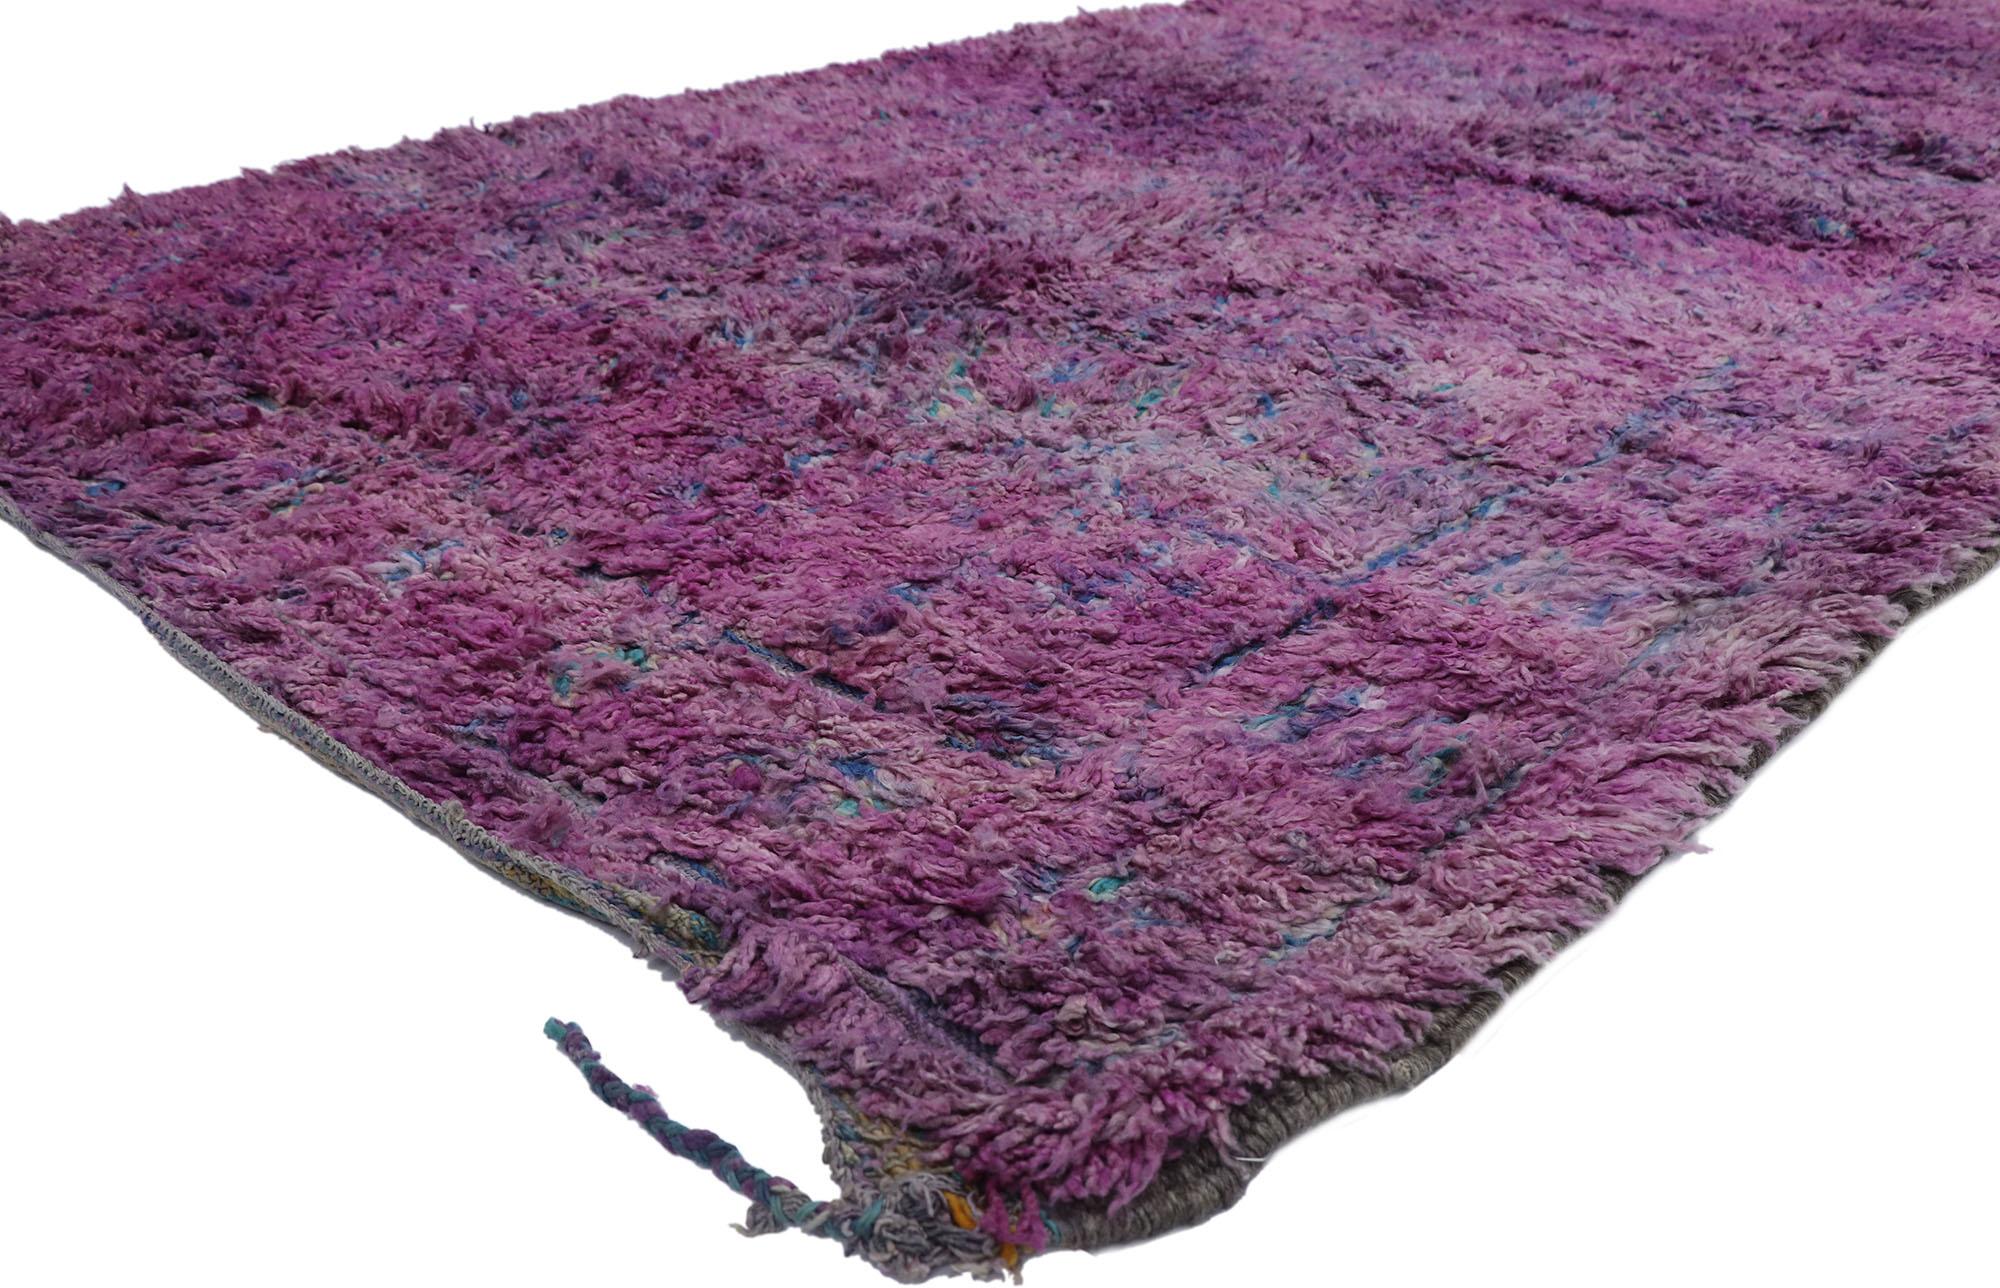 21503, vintage Berber Purple Beni M'Guild Moroccan rug with Bohemian style. Showcasing a bold expressive design, incredible detail and texture, this hand knotted wool vintage Berber Beni M'Guild Moroccan rug is a captivating vision of woven beauty.